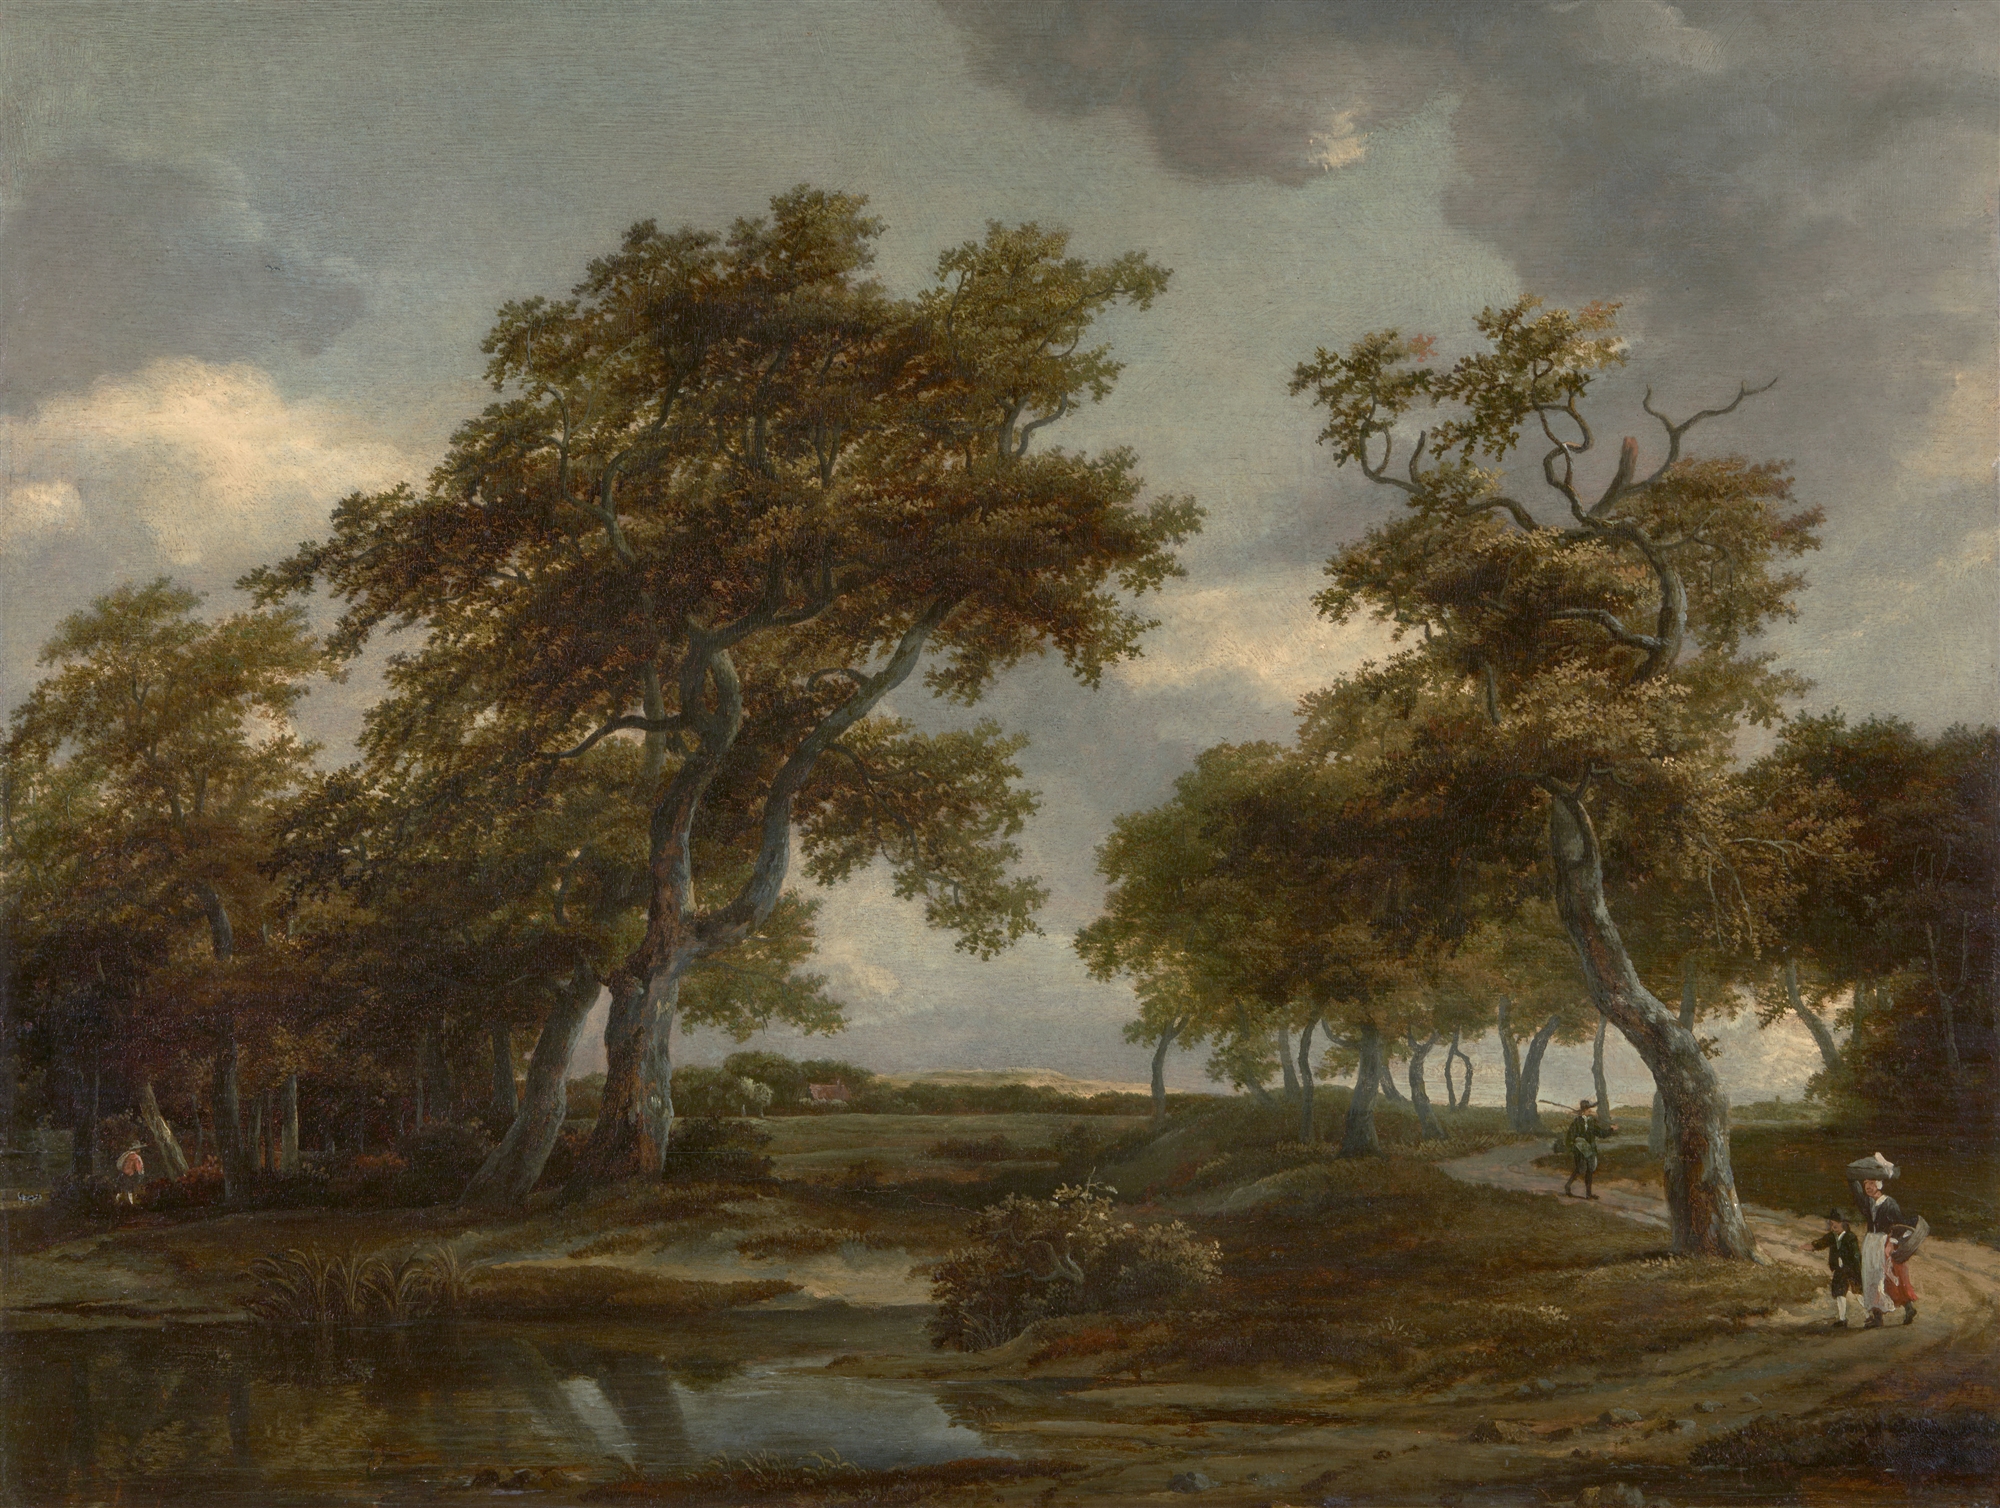 Meindert Hobbema, Wooded River Landscape with Figures on a Path